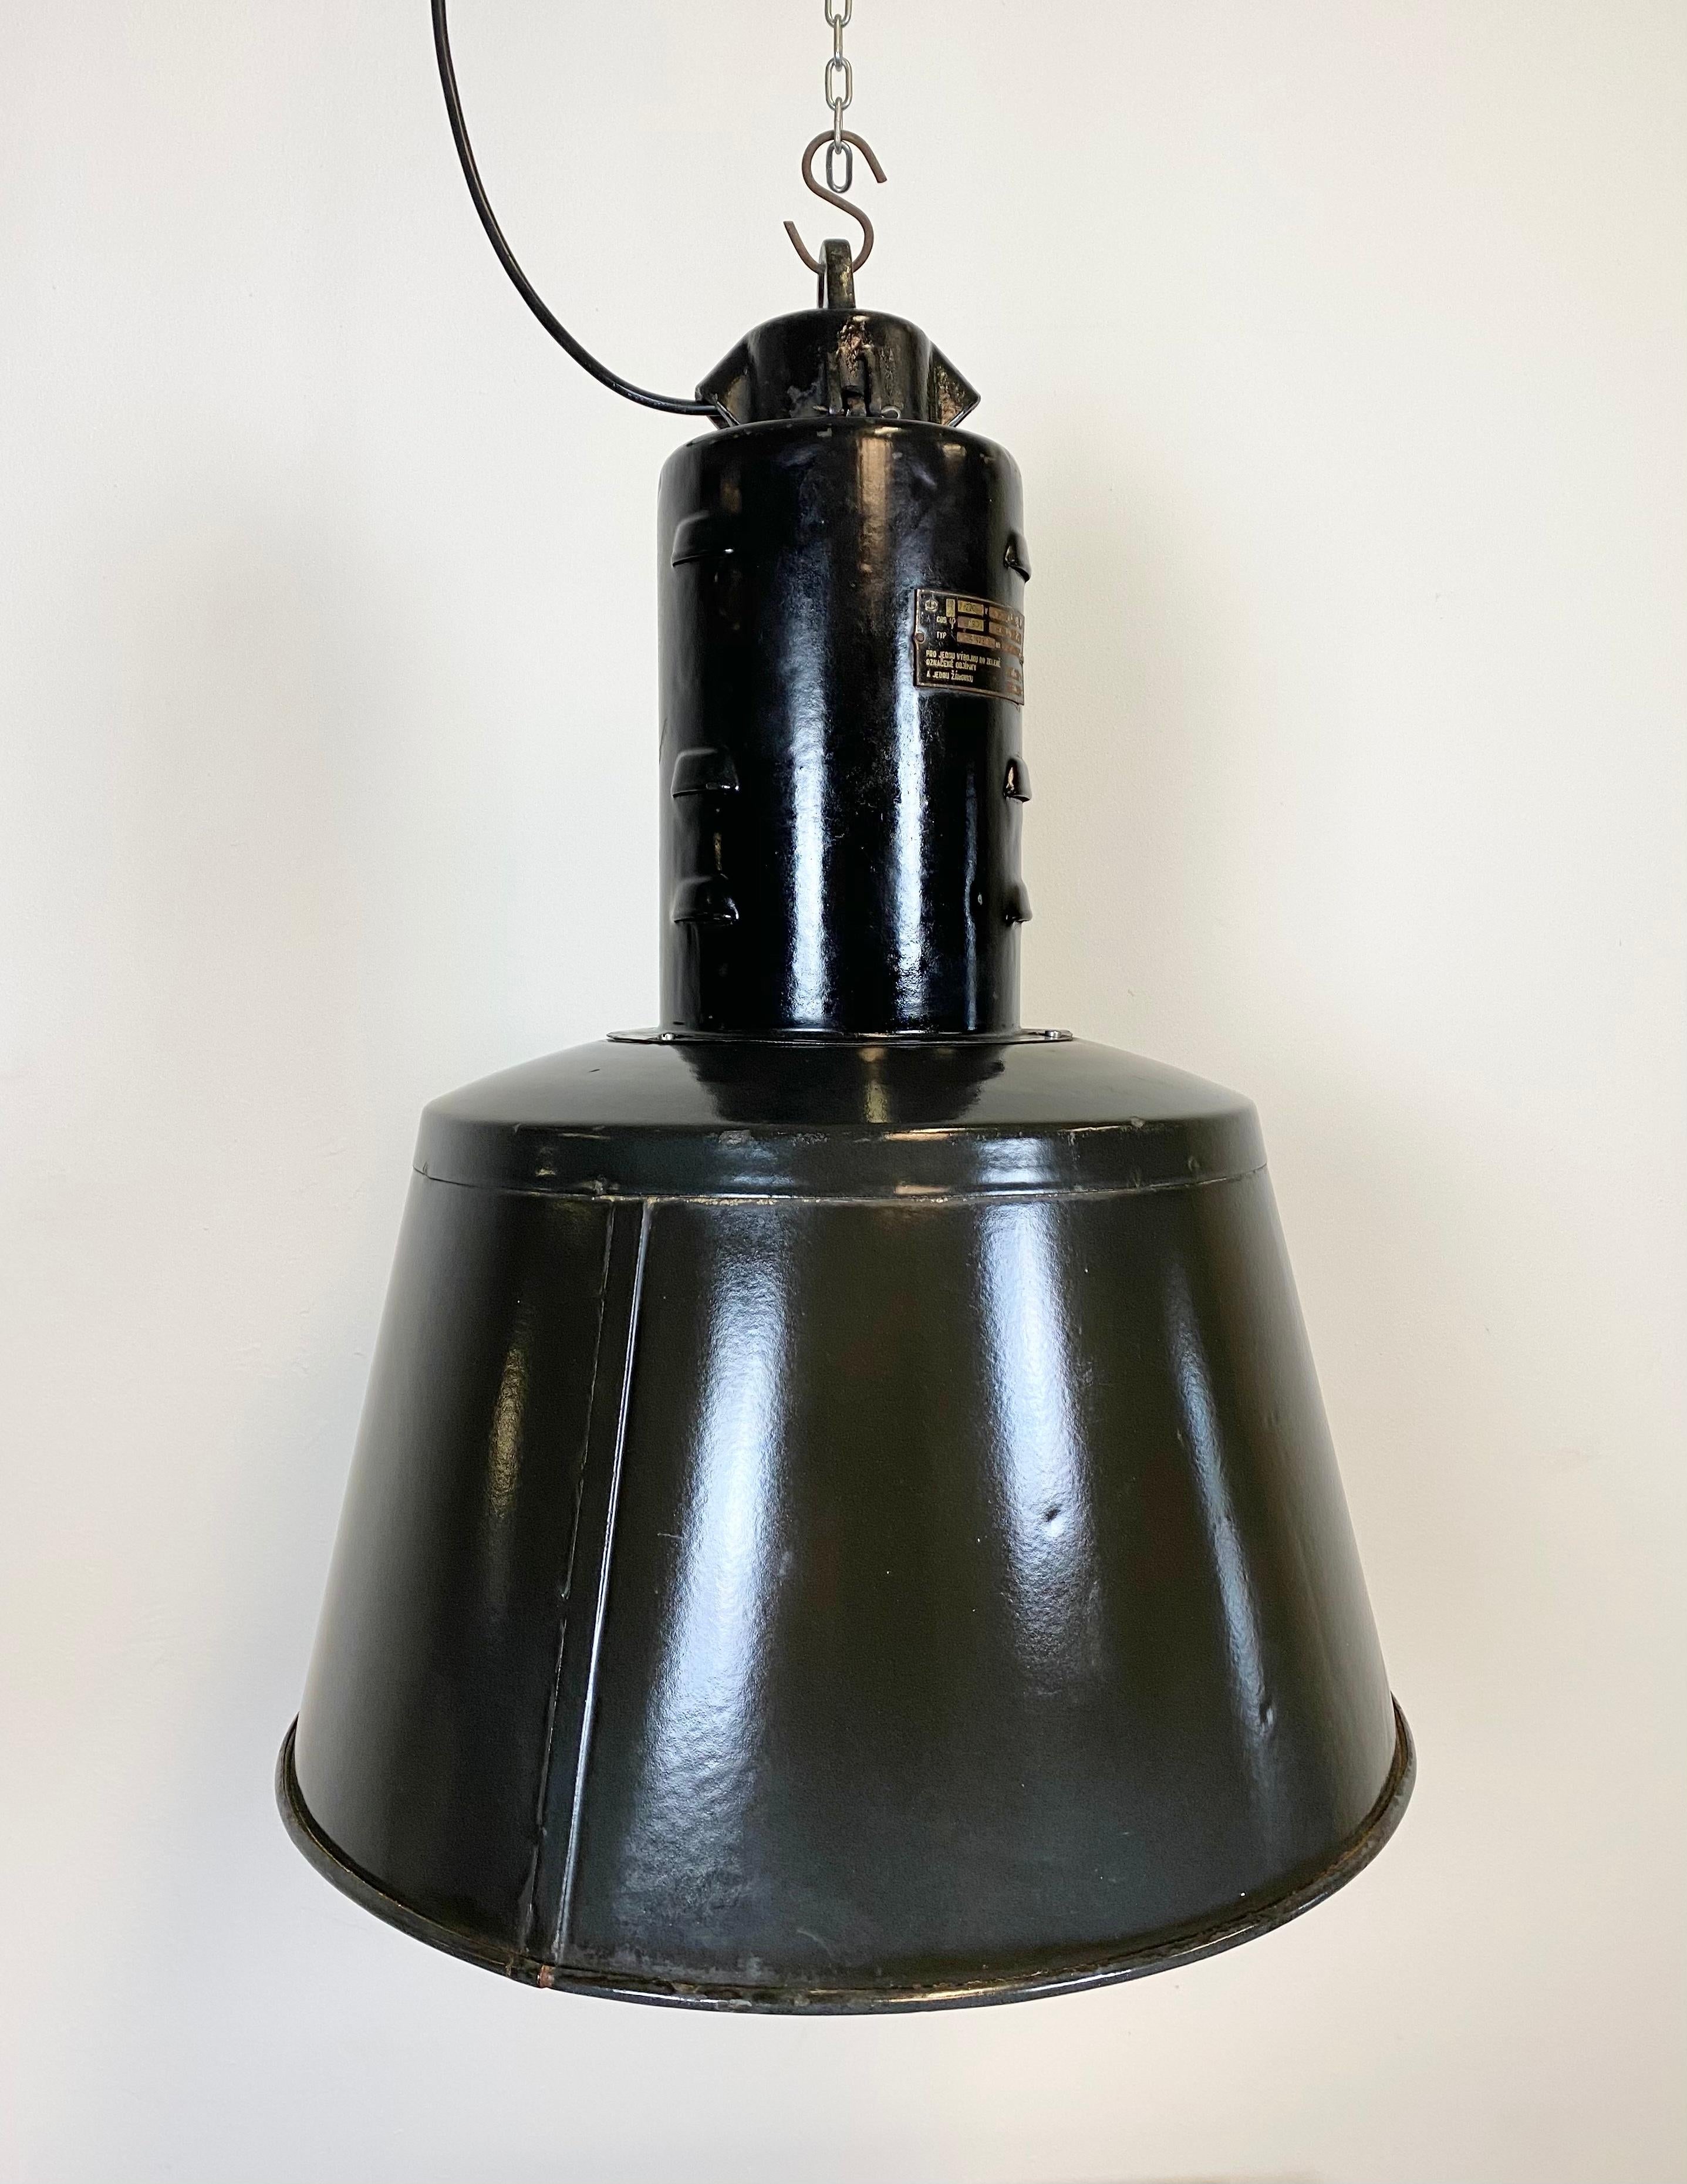 Rare black enamel industrial pendant lamp made during the 1950s in former Czechoslovakia. White enamel interior. Cast iron top. Two new porcelain sockets for E 27 lightbulbs. New wire. The weight of the lamp is 5kg.